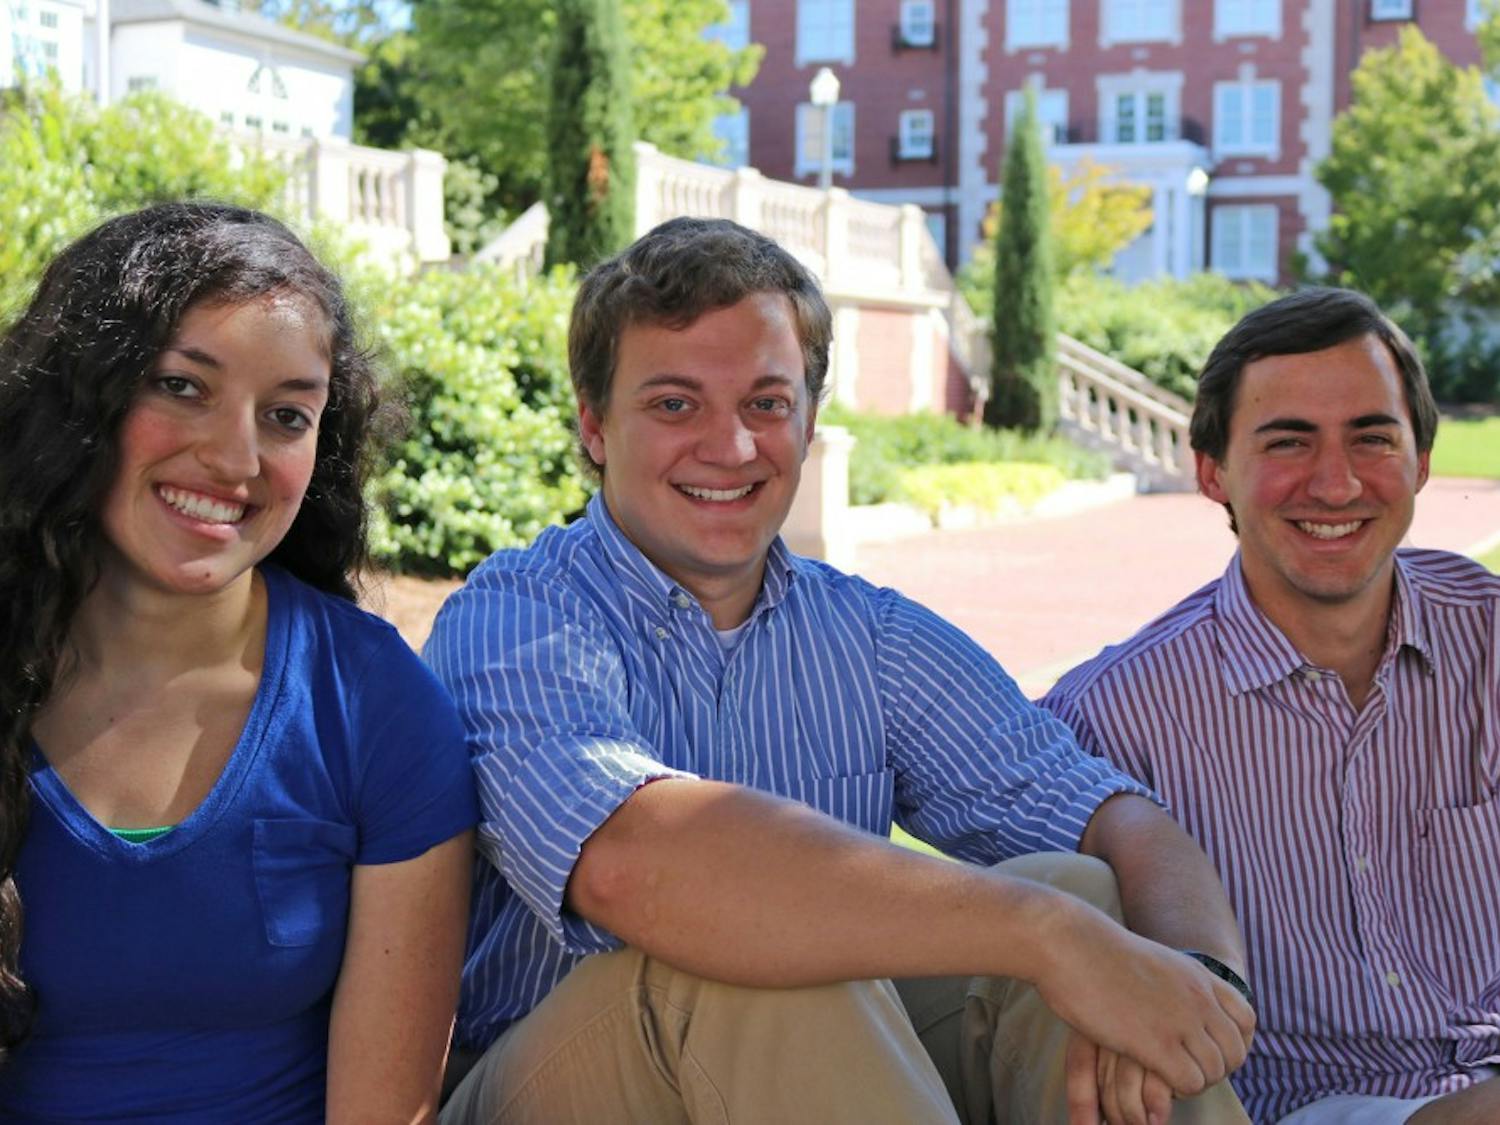 Three Auburn University seniors are nominees for the Rhodes Scholarship, which gives 32 of the most outstanding young scholars in the country an opportunity to study at the University of Oxford in the United Kingdom. Auburn’s nominees are, from left, Chloe Chaudhury of Auburn, Alabama, Blake Willoughby of Phenix City, Alabama, and Sean Bittner of Clearwater, Florida. (Contributed by Auburn University)